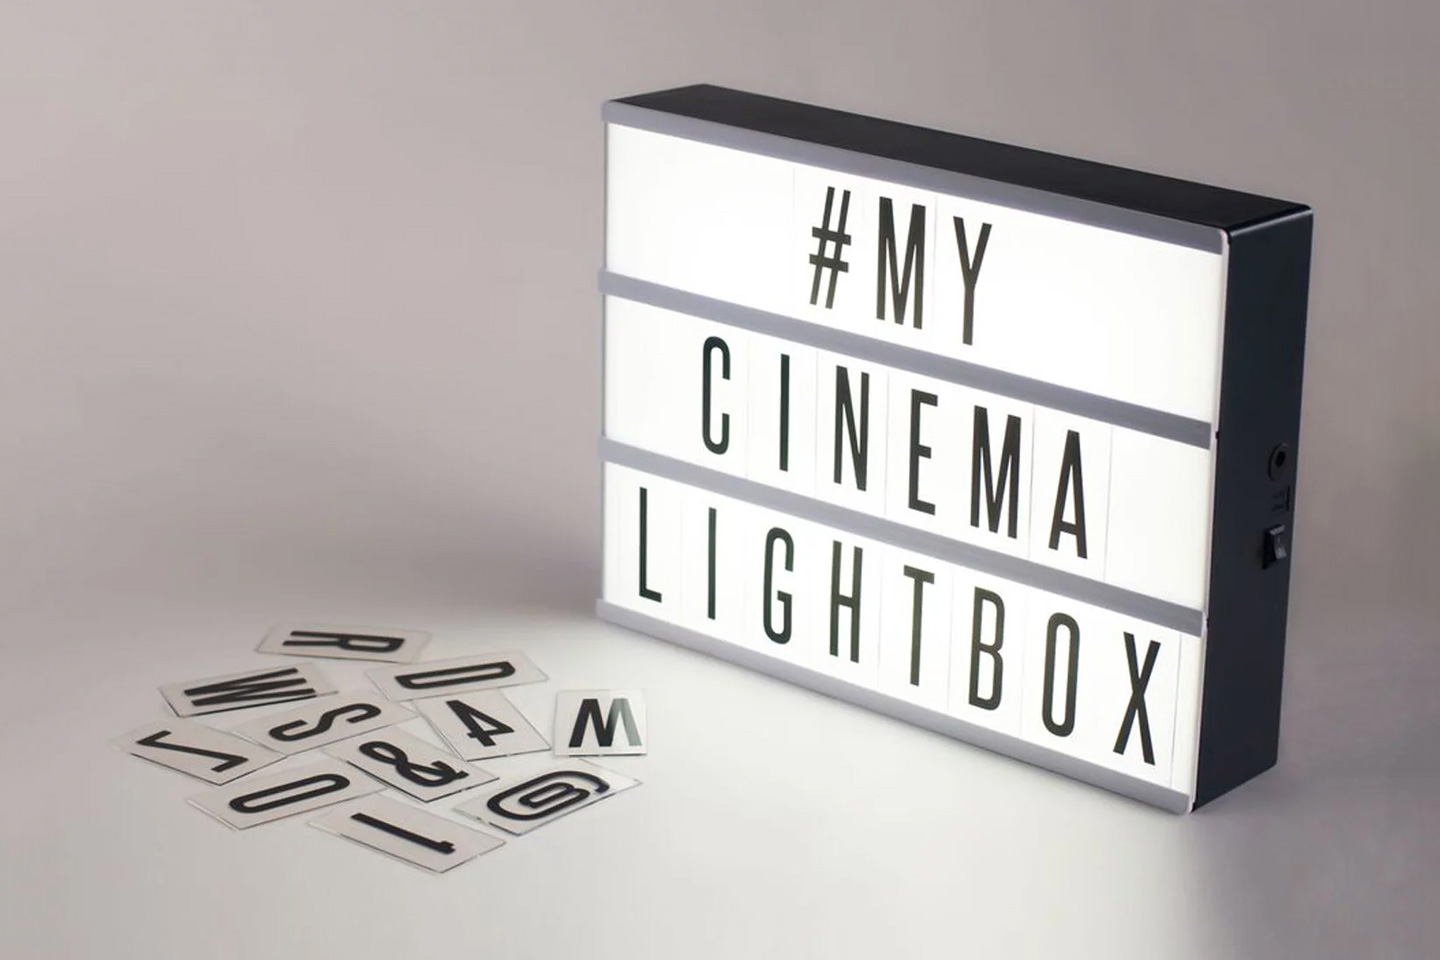 This retro cinema lightbox is perfect for writing fun or